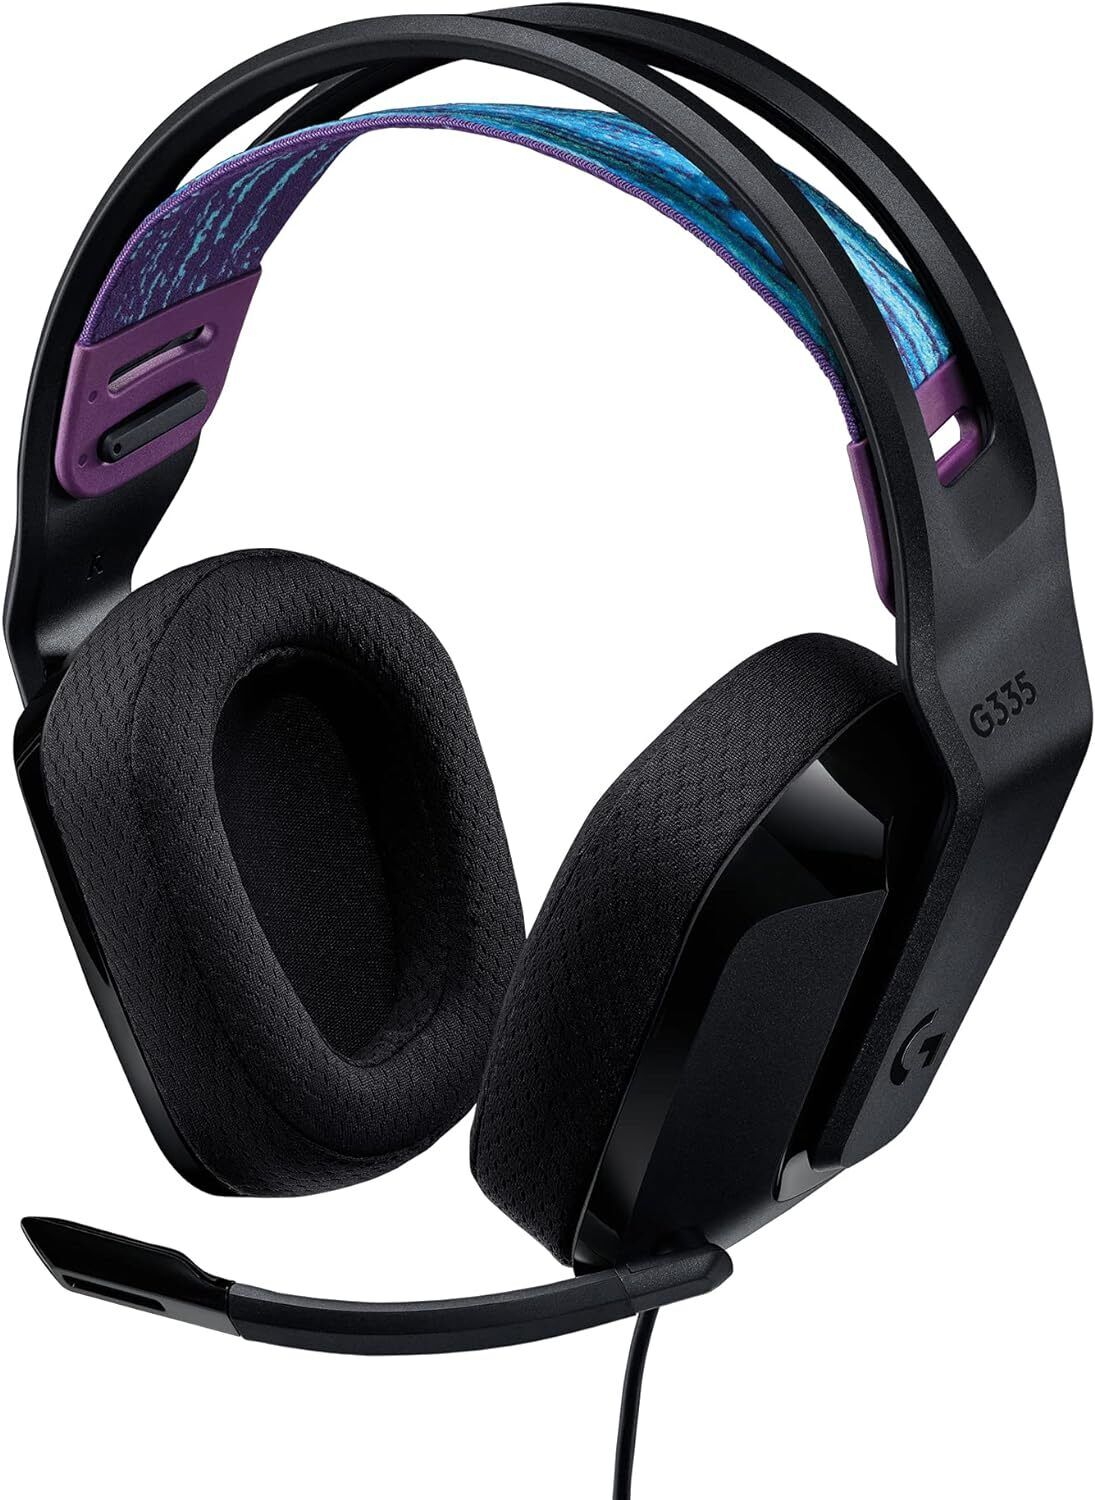 Wired Gaming Headset, with Flip to Mute Microphone, 3.5mm Audio Jack